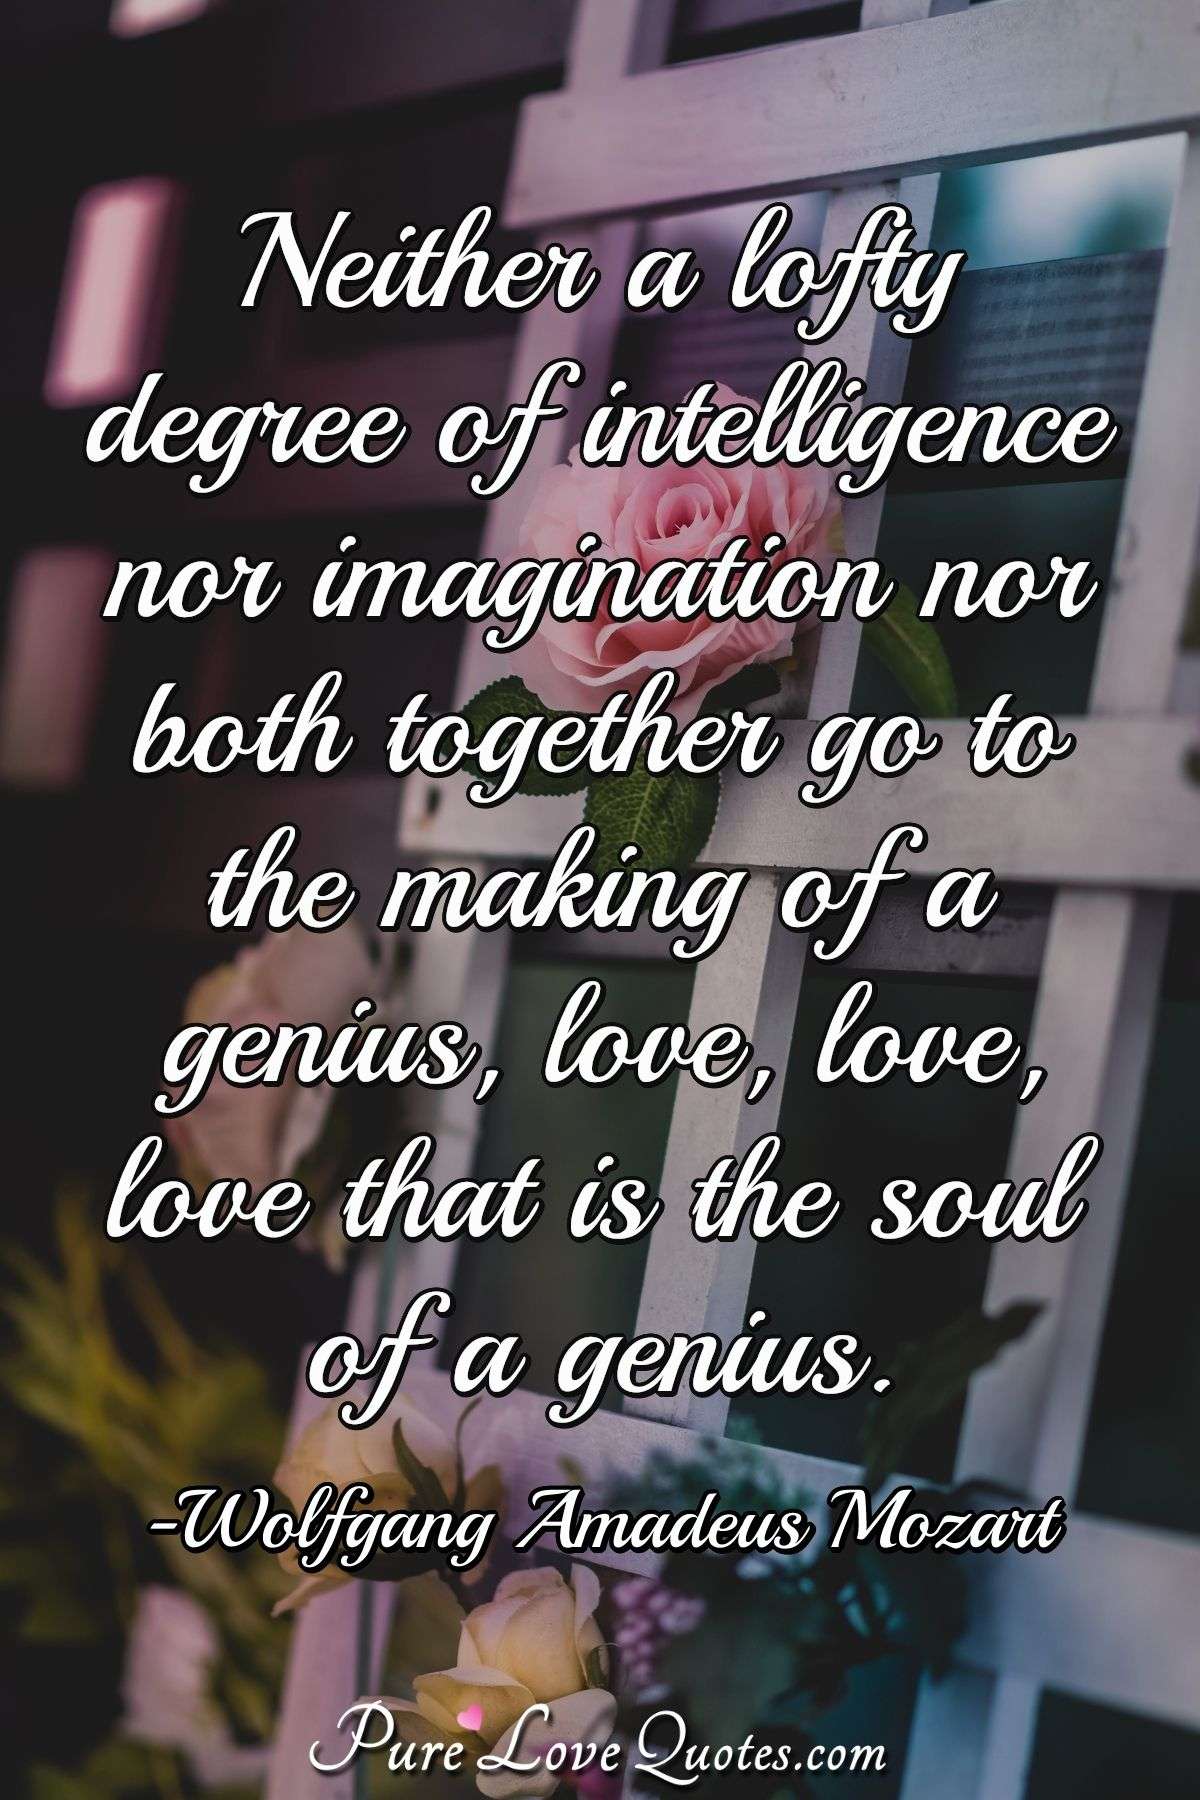 Neither a lofty degree of intelligence nor imagination nor both together go to the making of a genius, love, love, love that is the soul of a genius. - Wolfgang Amadeus Mozart